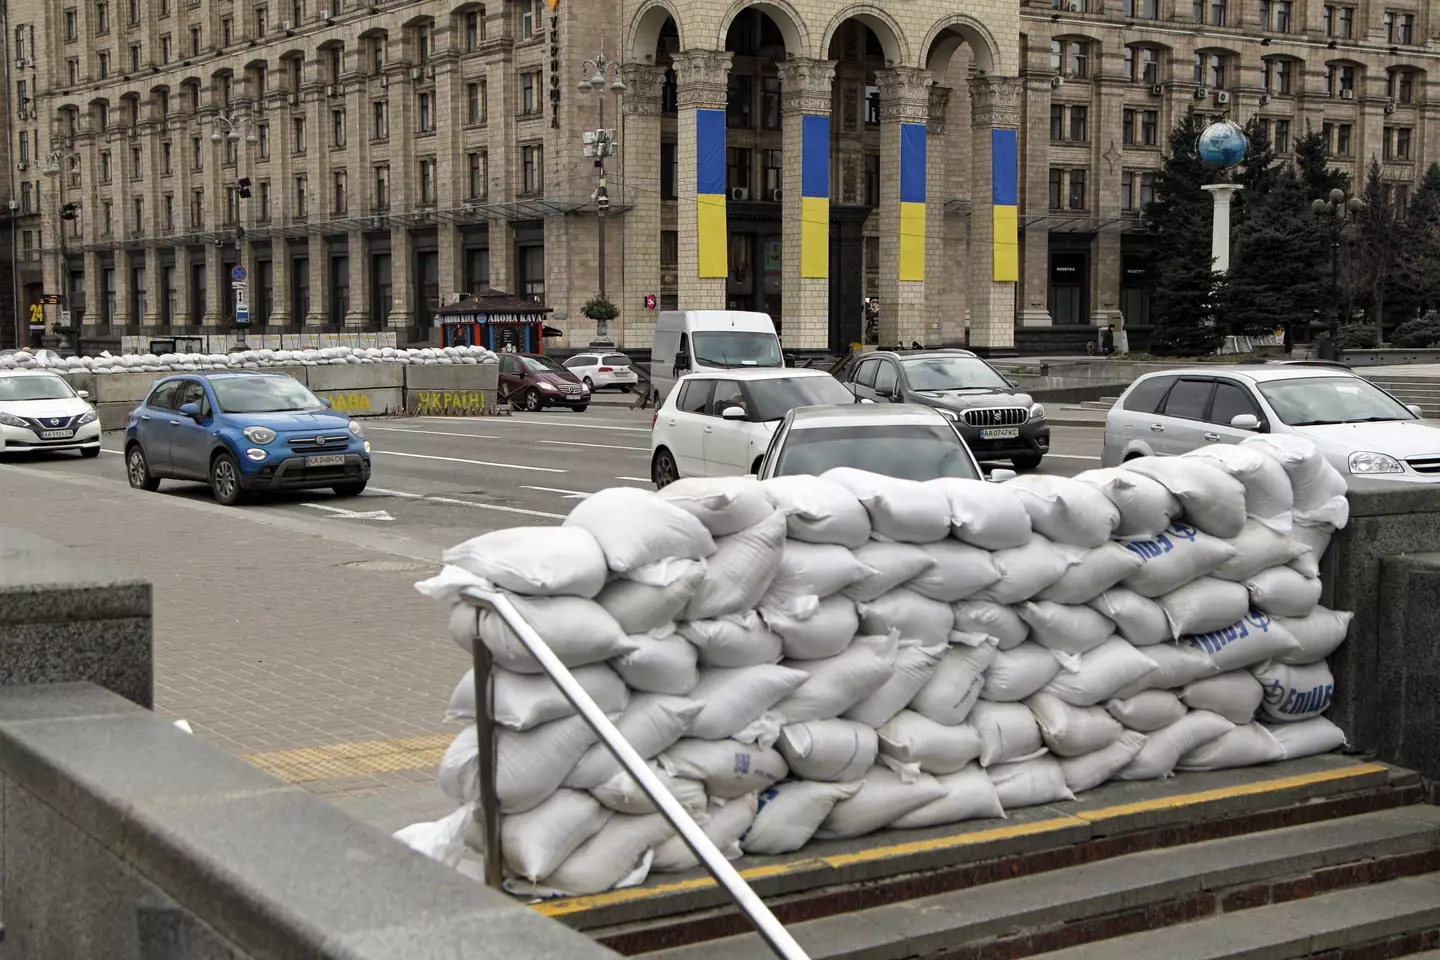 The entrance to an underpass lined with sandbags in Kyiv (Alamy)